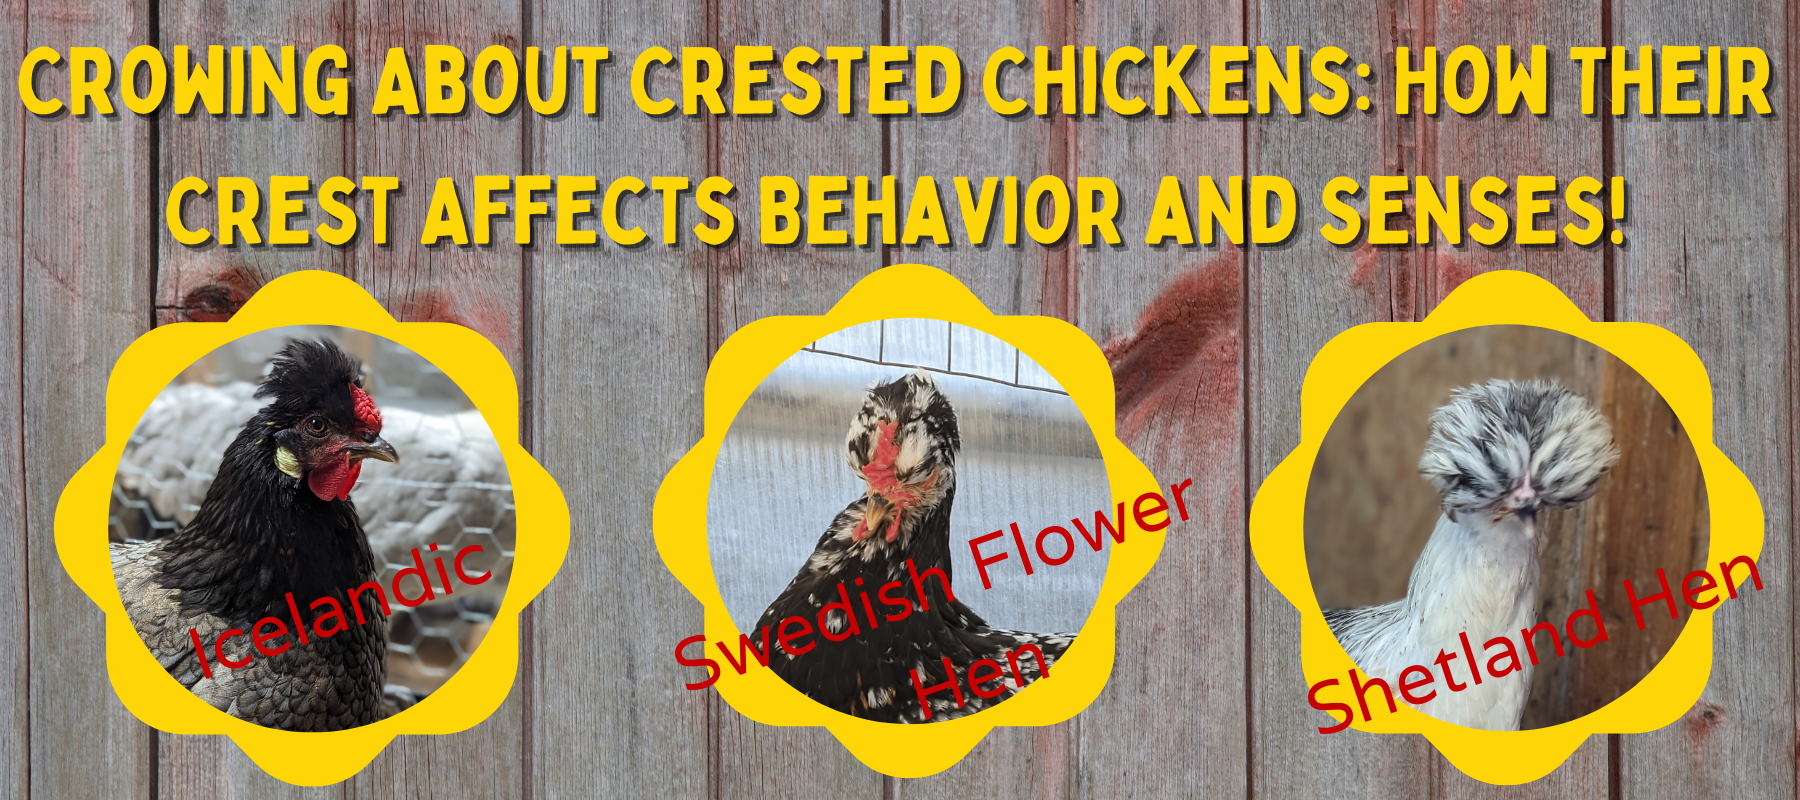 Crowing About Crested Chickens: How Their Crest Affects Behavior and Senses!